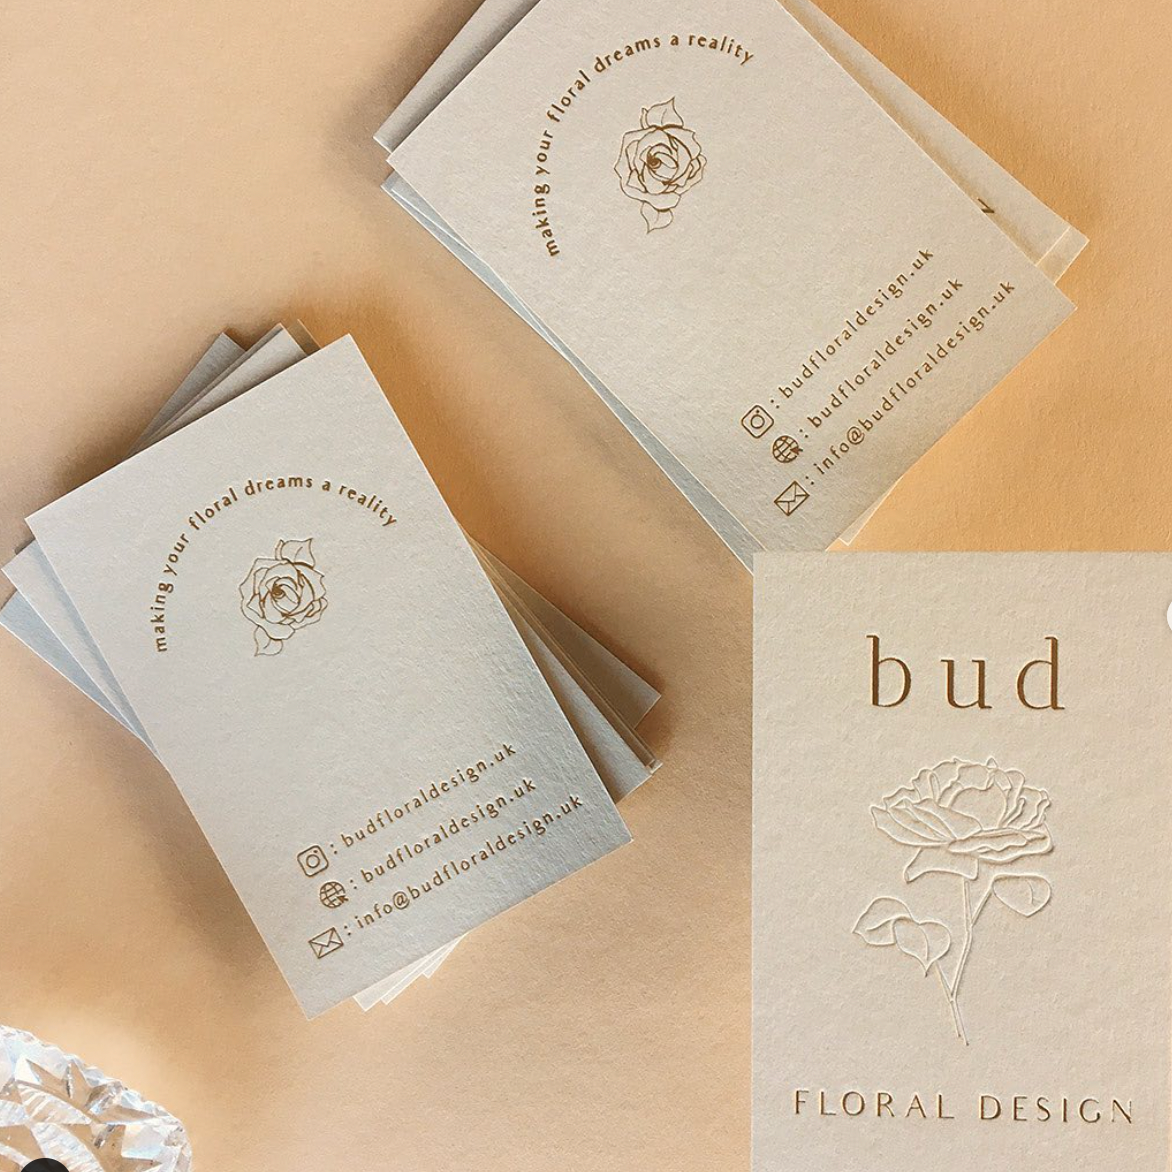 Neutral, minimalist business cards with an embossed rose and gold text.